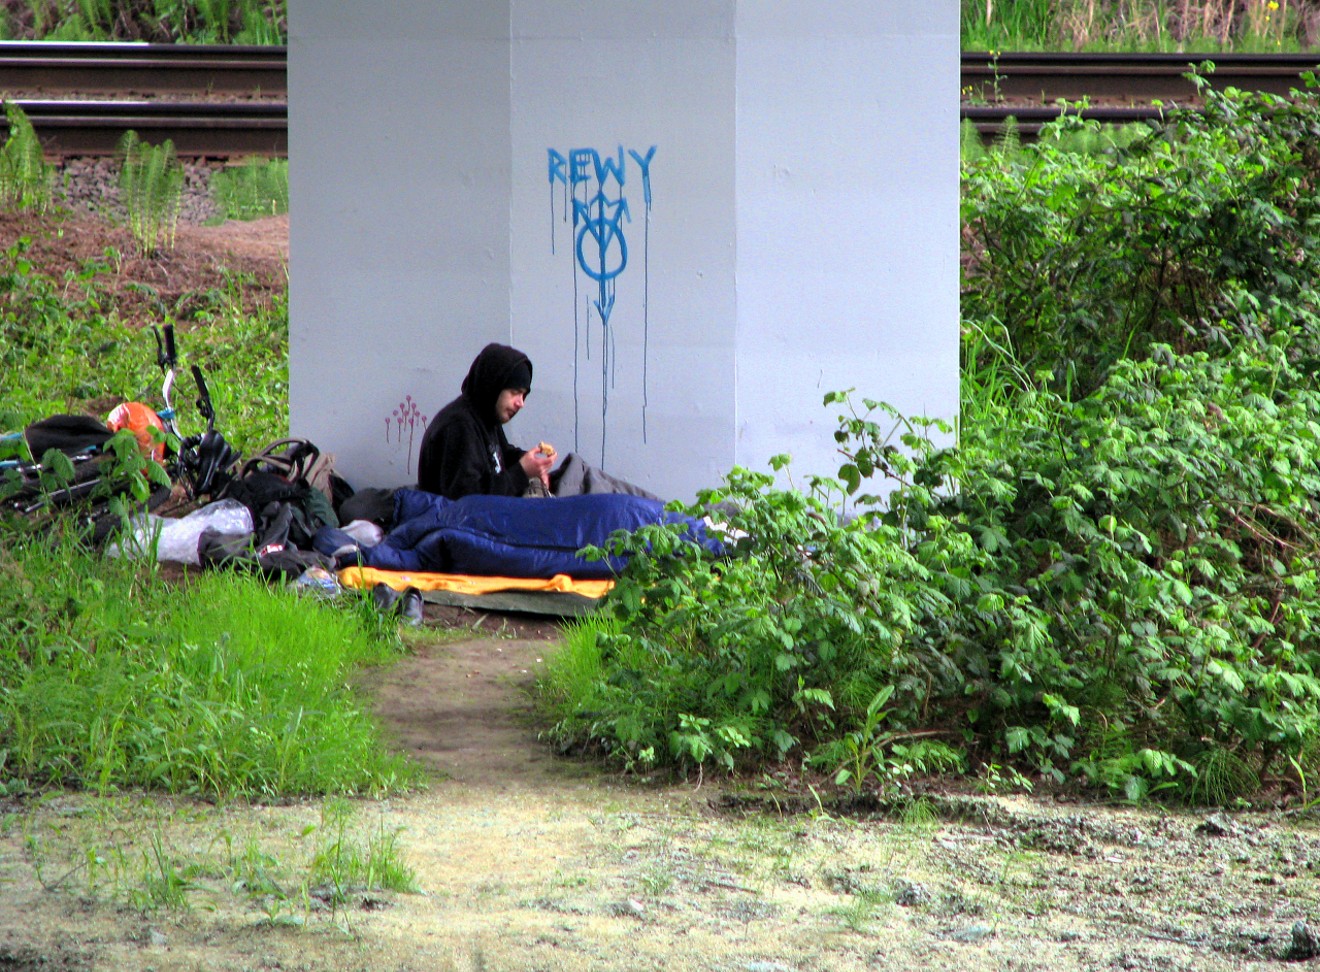 A $9.3-million HUD grant to Dallas and Collin counties will help address youth homelessness.